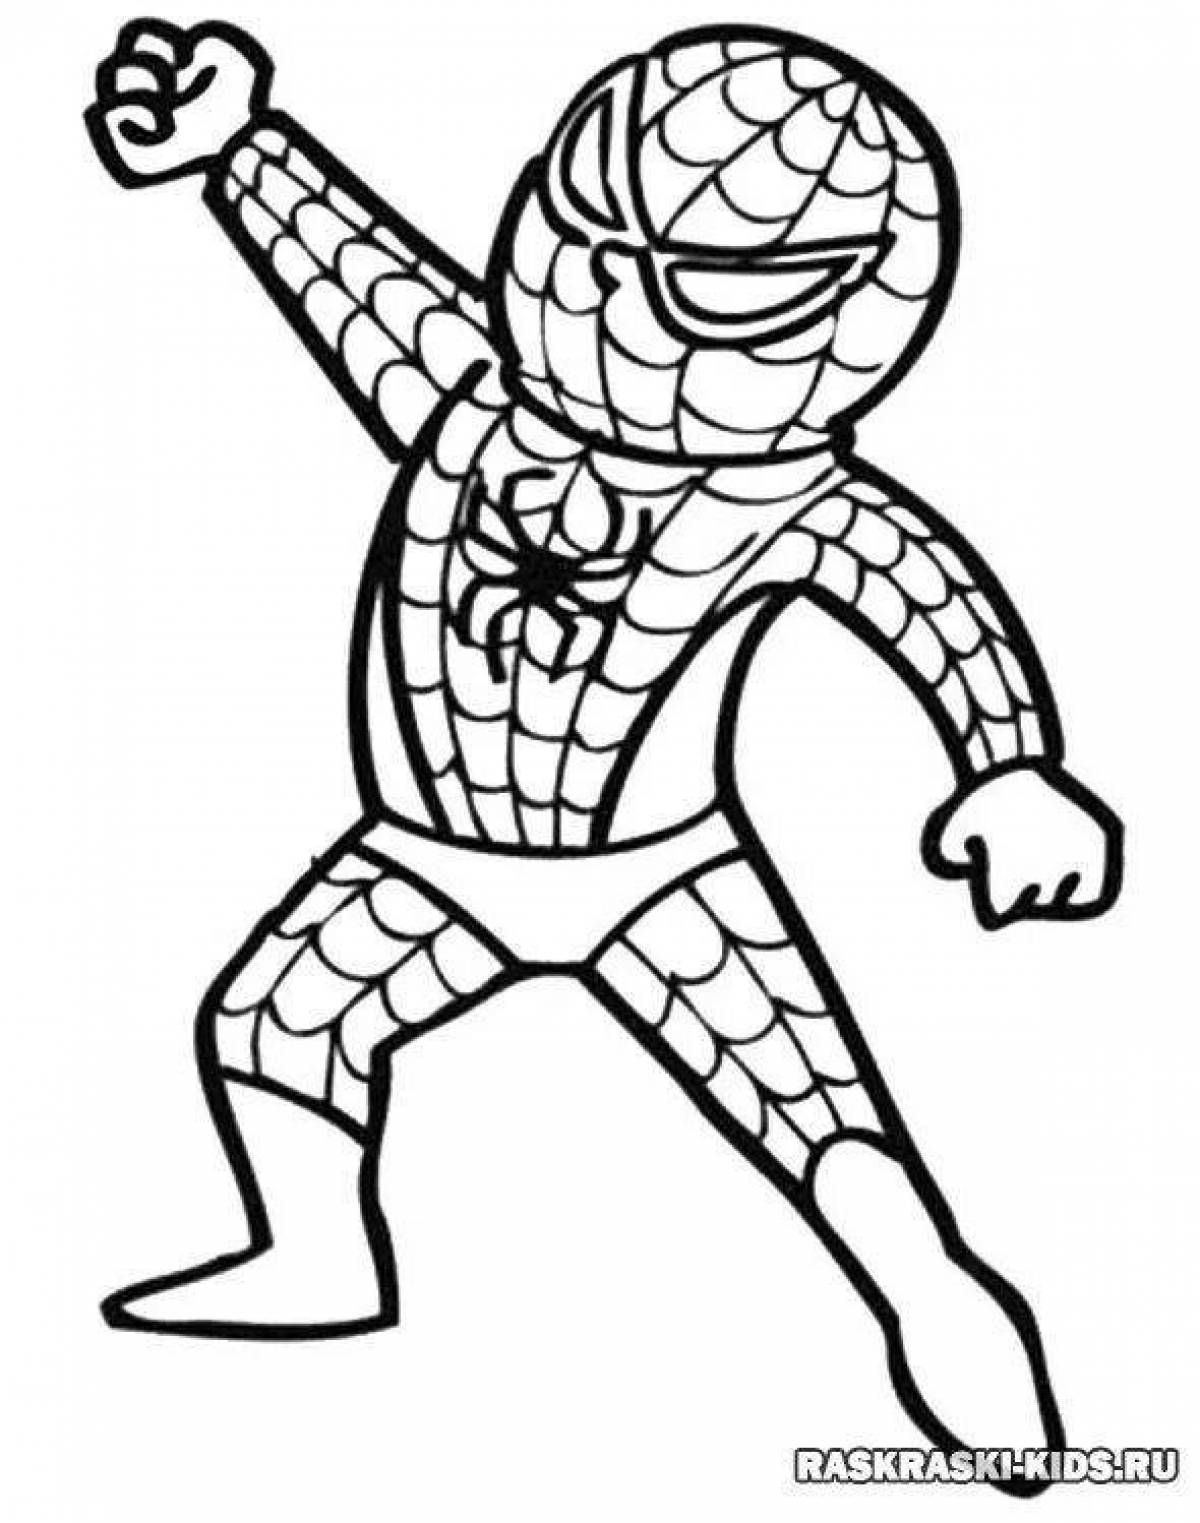 Incredible Spiderman coloring book for 6-7 year olds